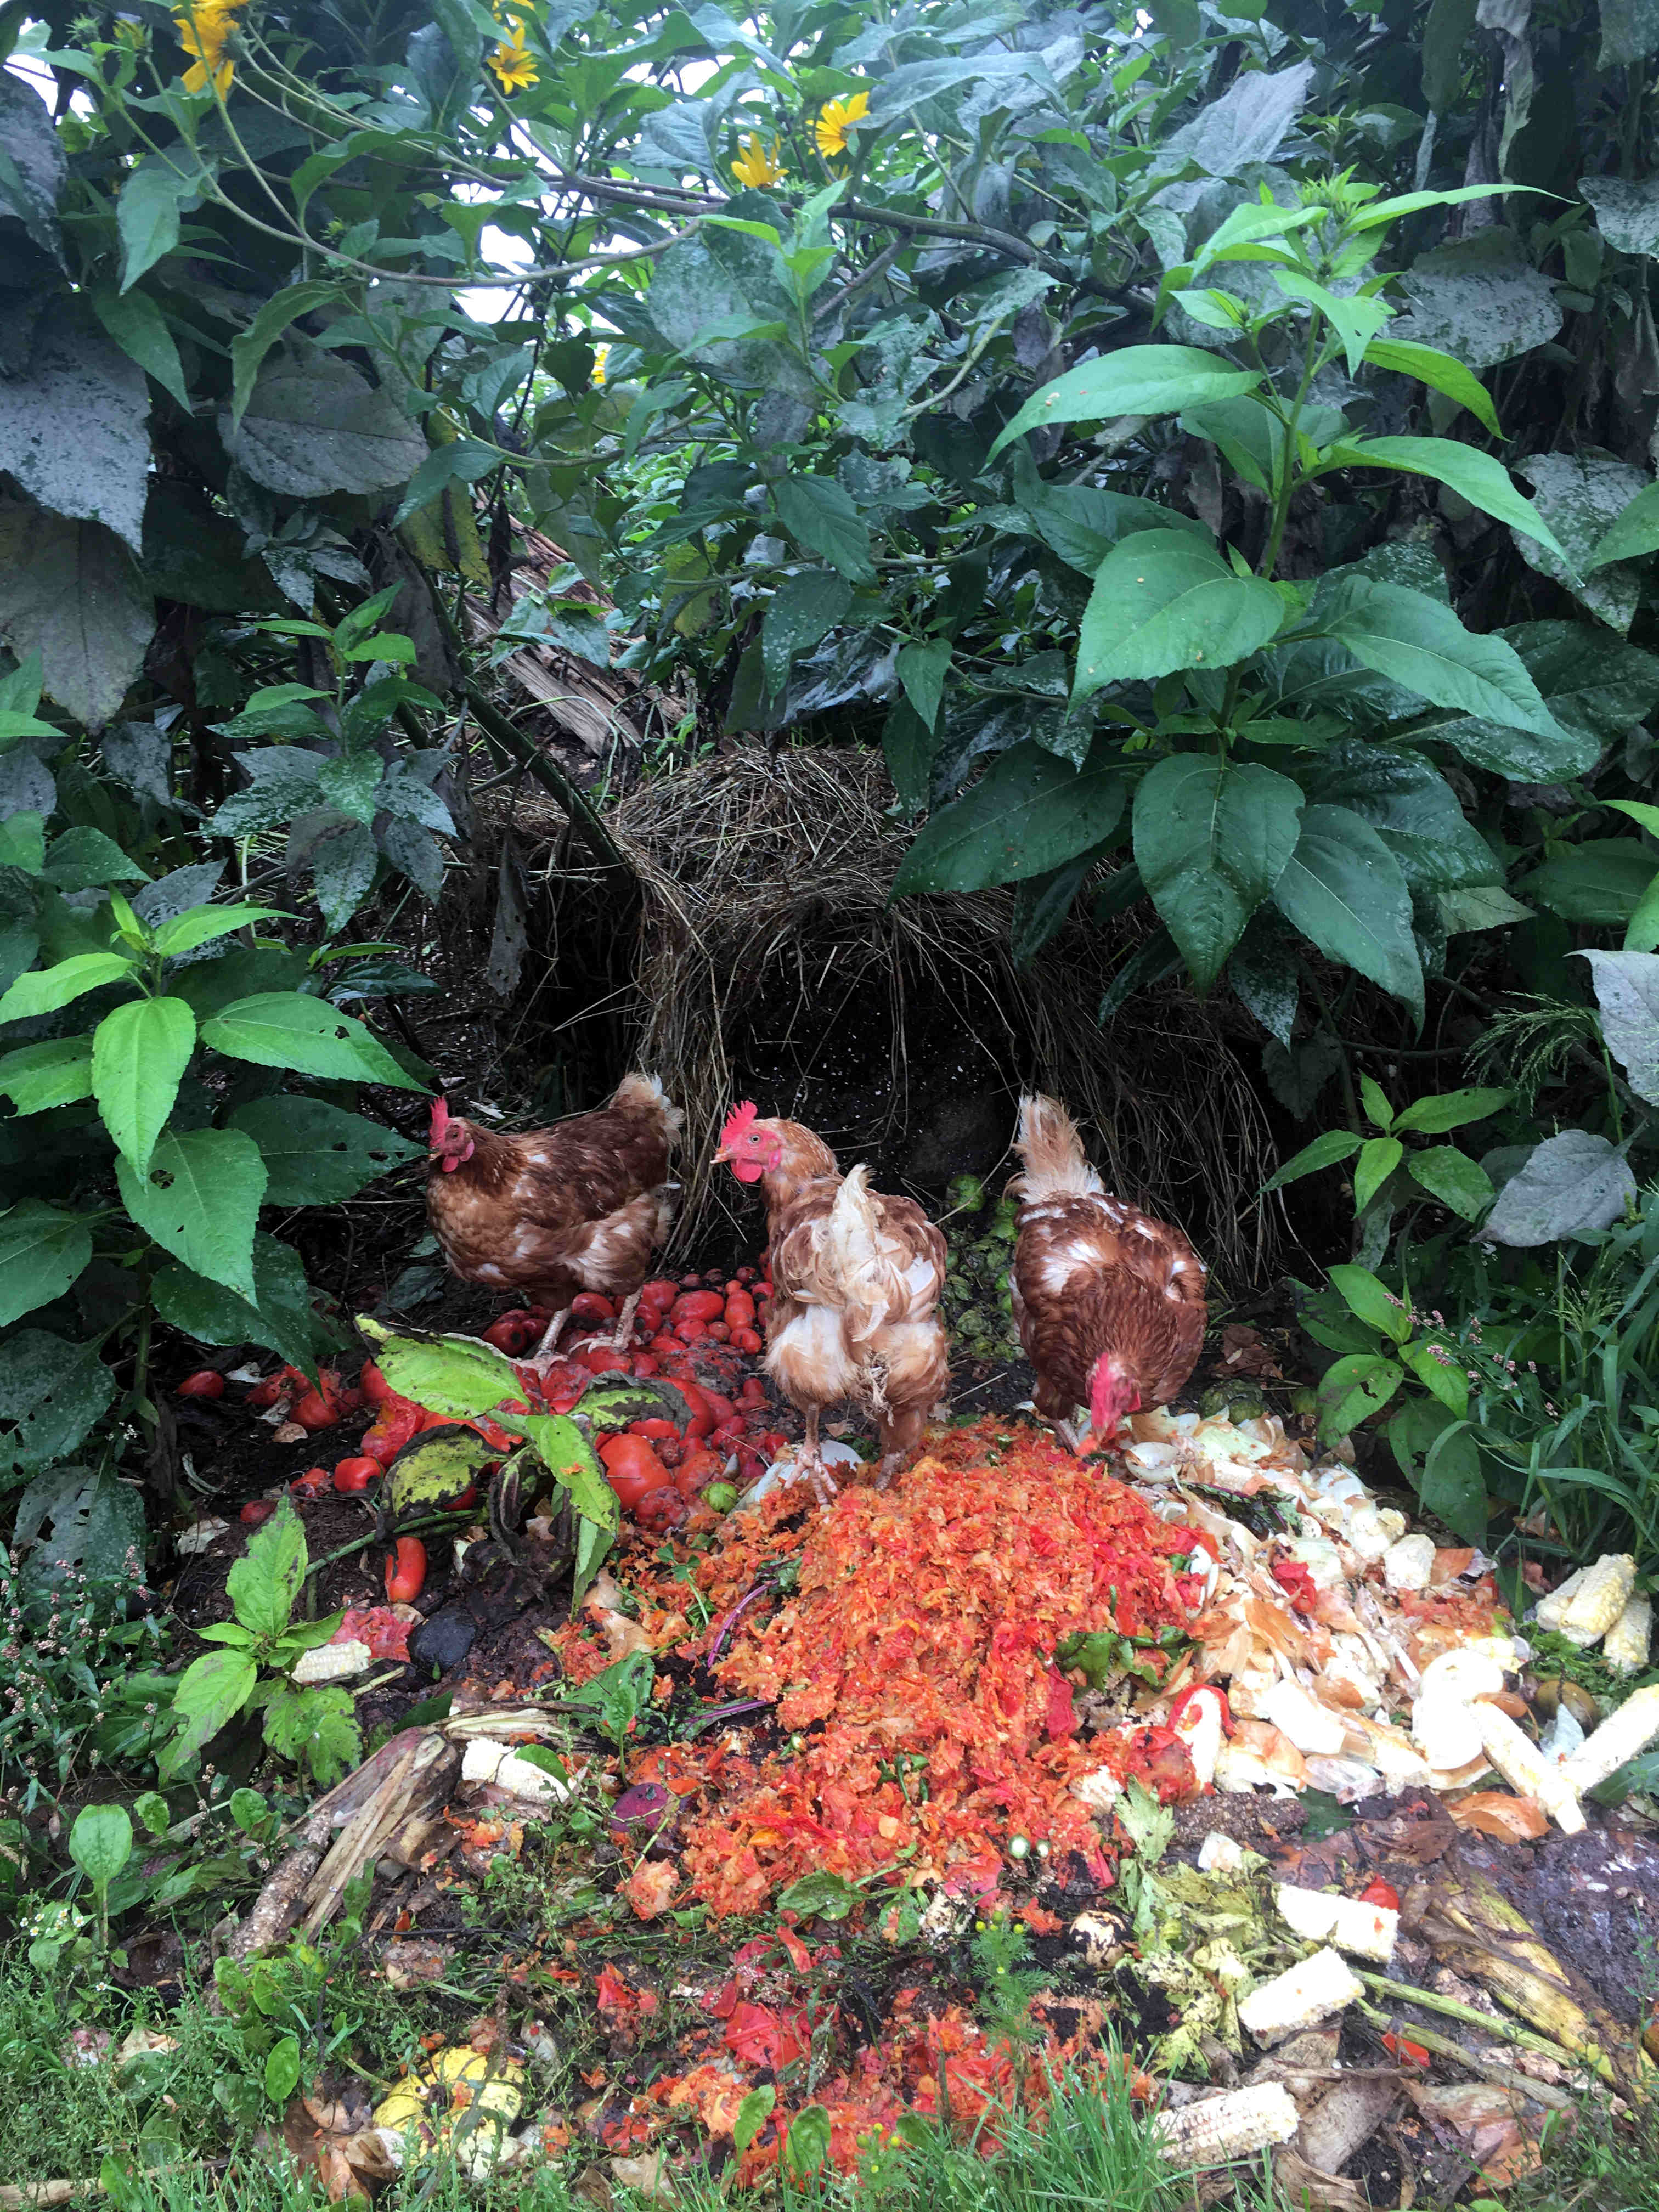 chickens eating food scraps in a compost pile